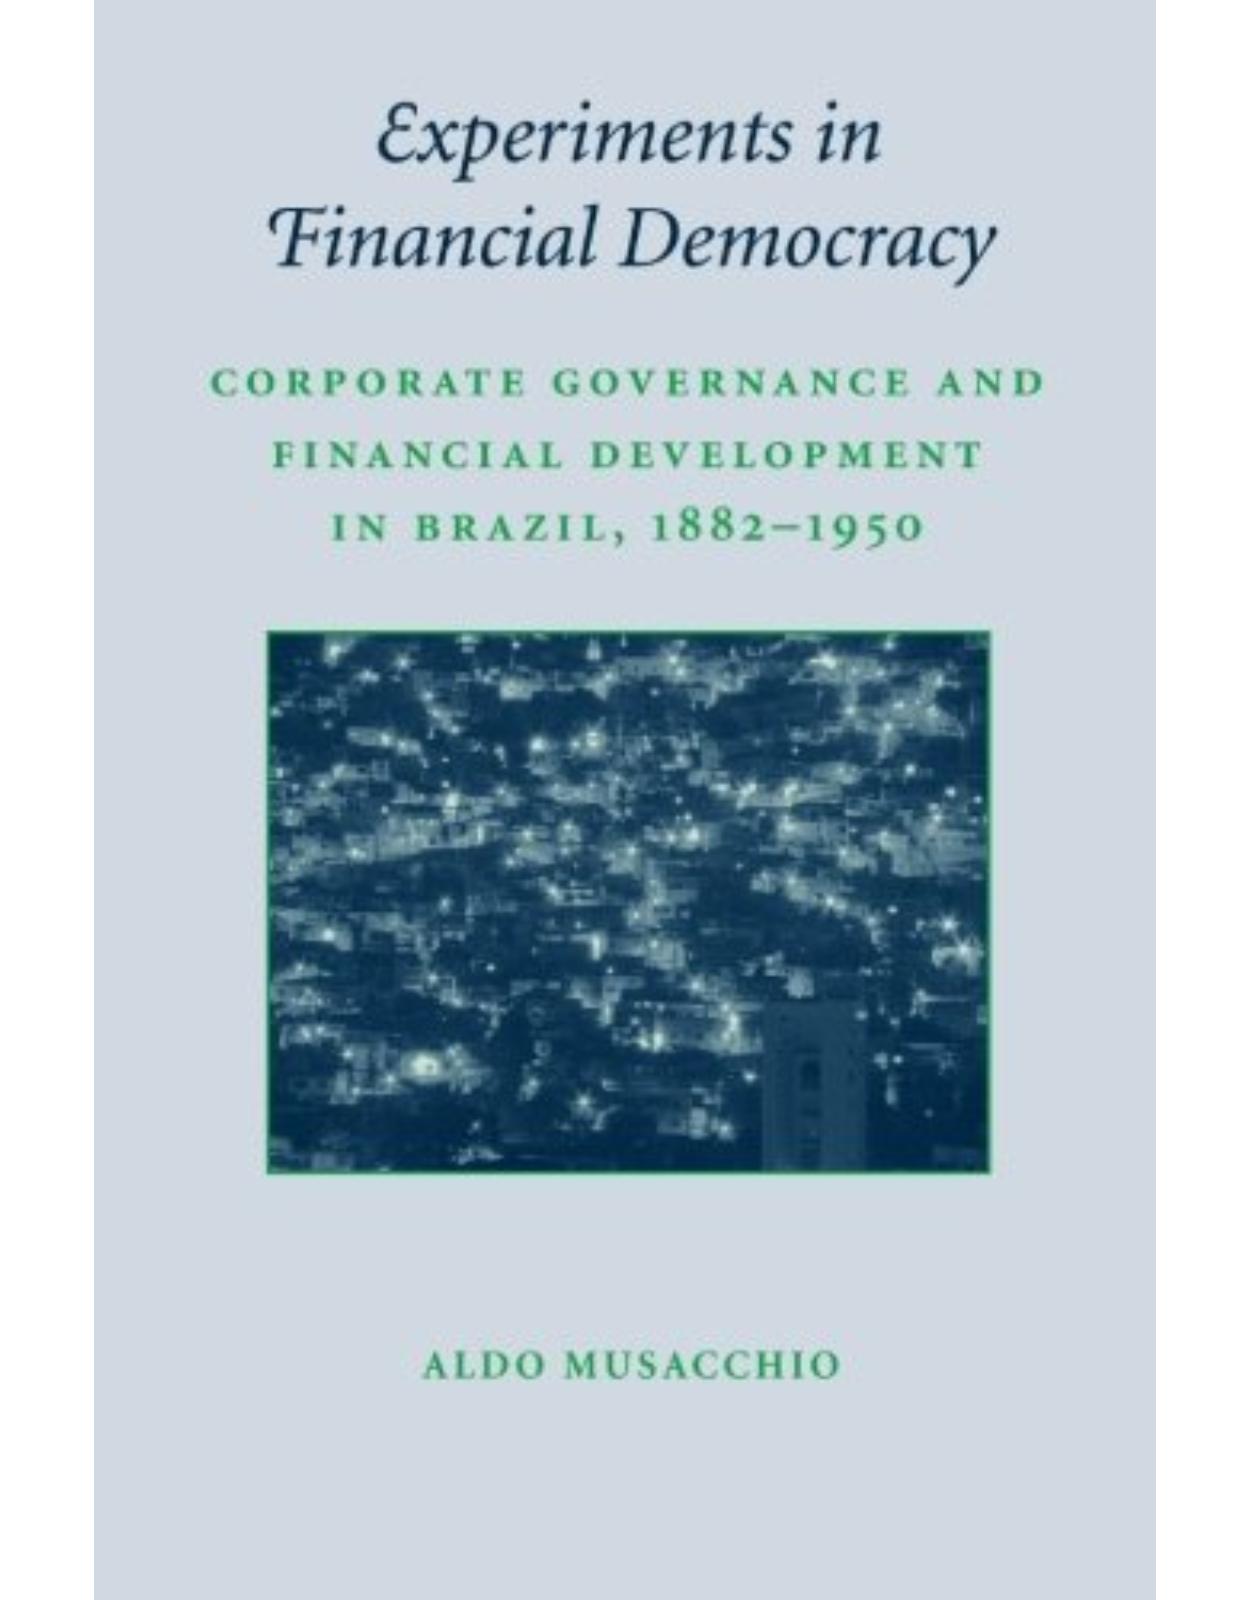 Experiments in Financial Democracy: Corporate Governance and Financial Development in Brazil, 1882-1950 (Studies in Macroeconomic History)